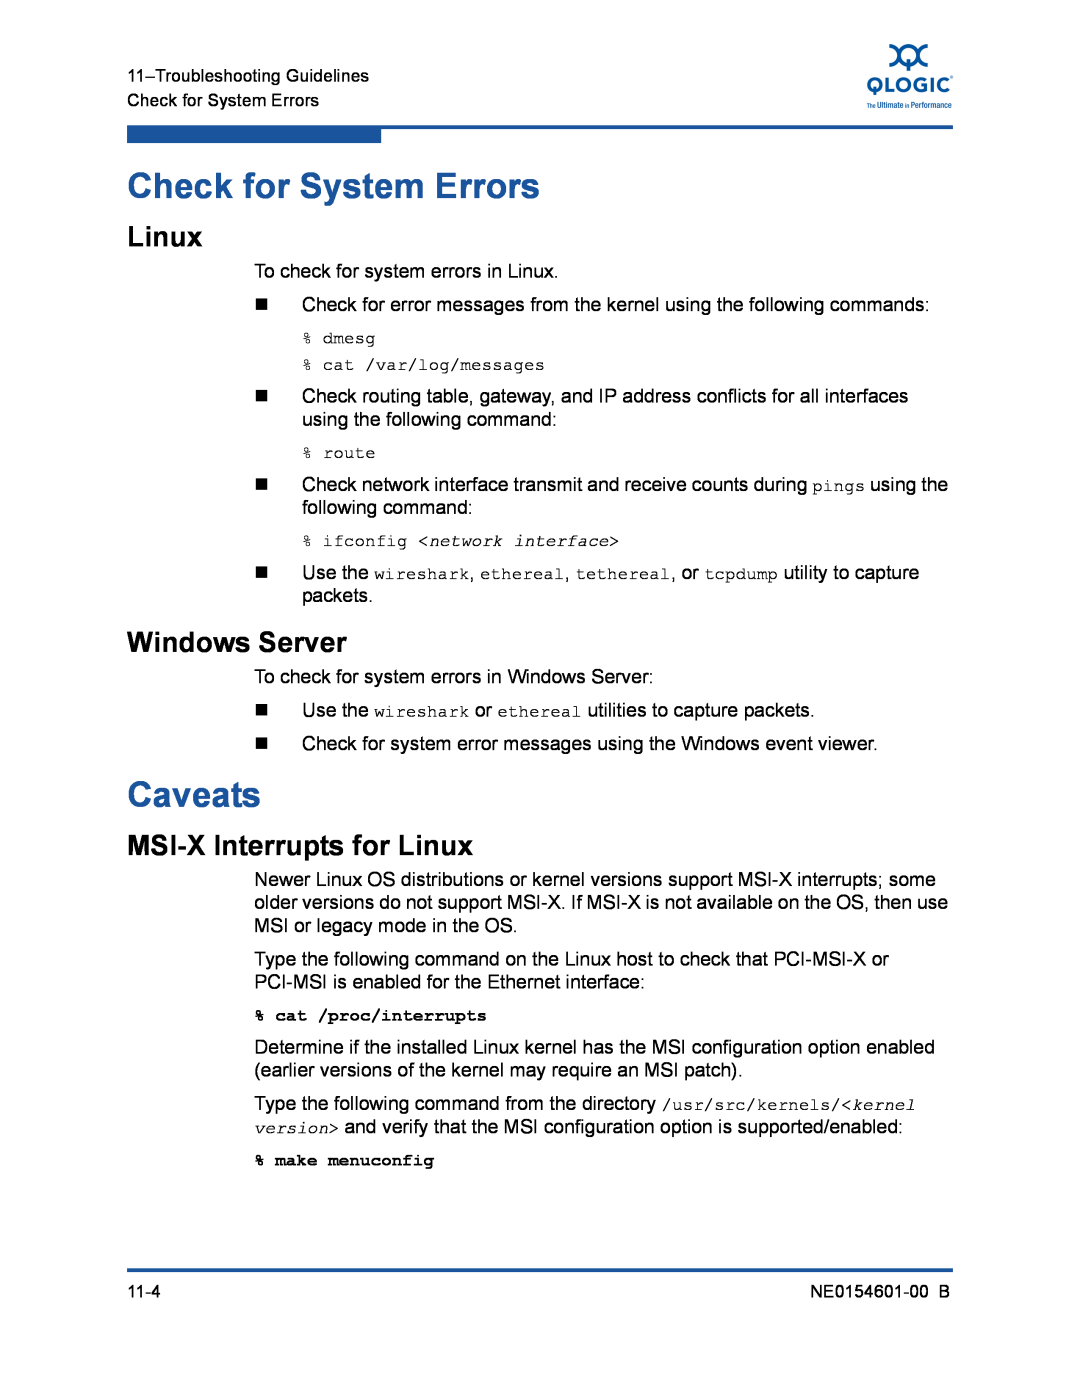 Q-Logic 3100, 3000 manual Check for System Errors, Caveats, MSI-X Interrupts for Linux, Windows Server 